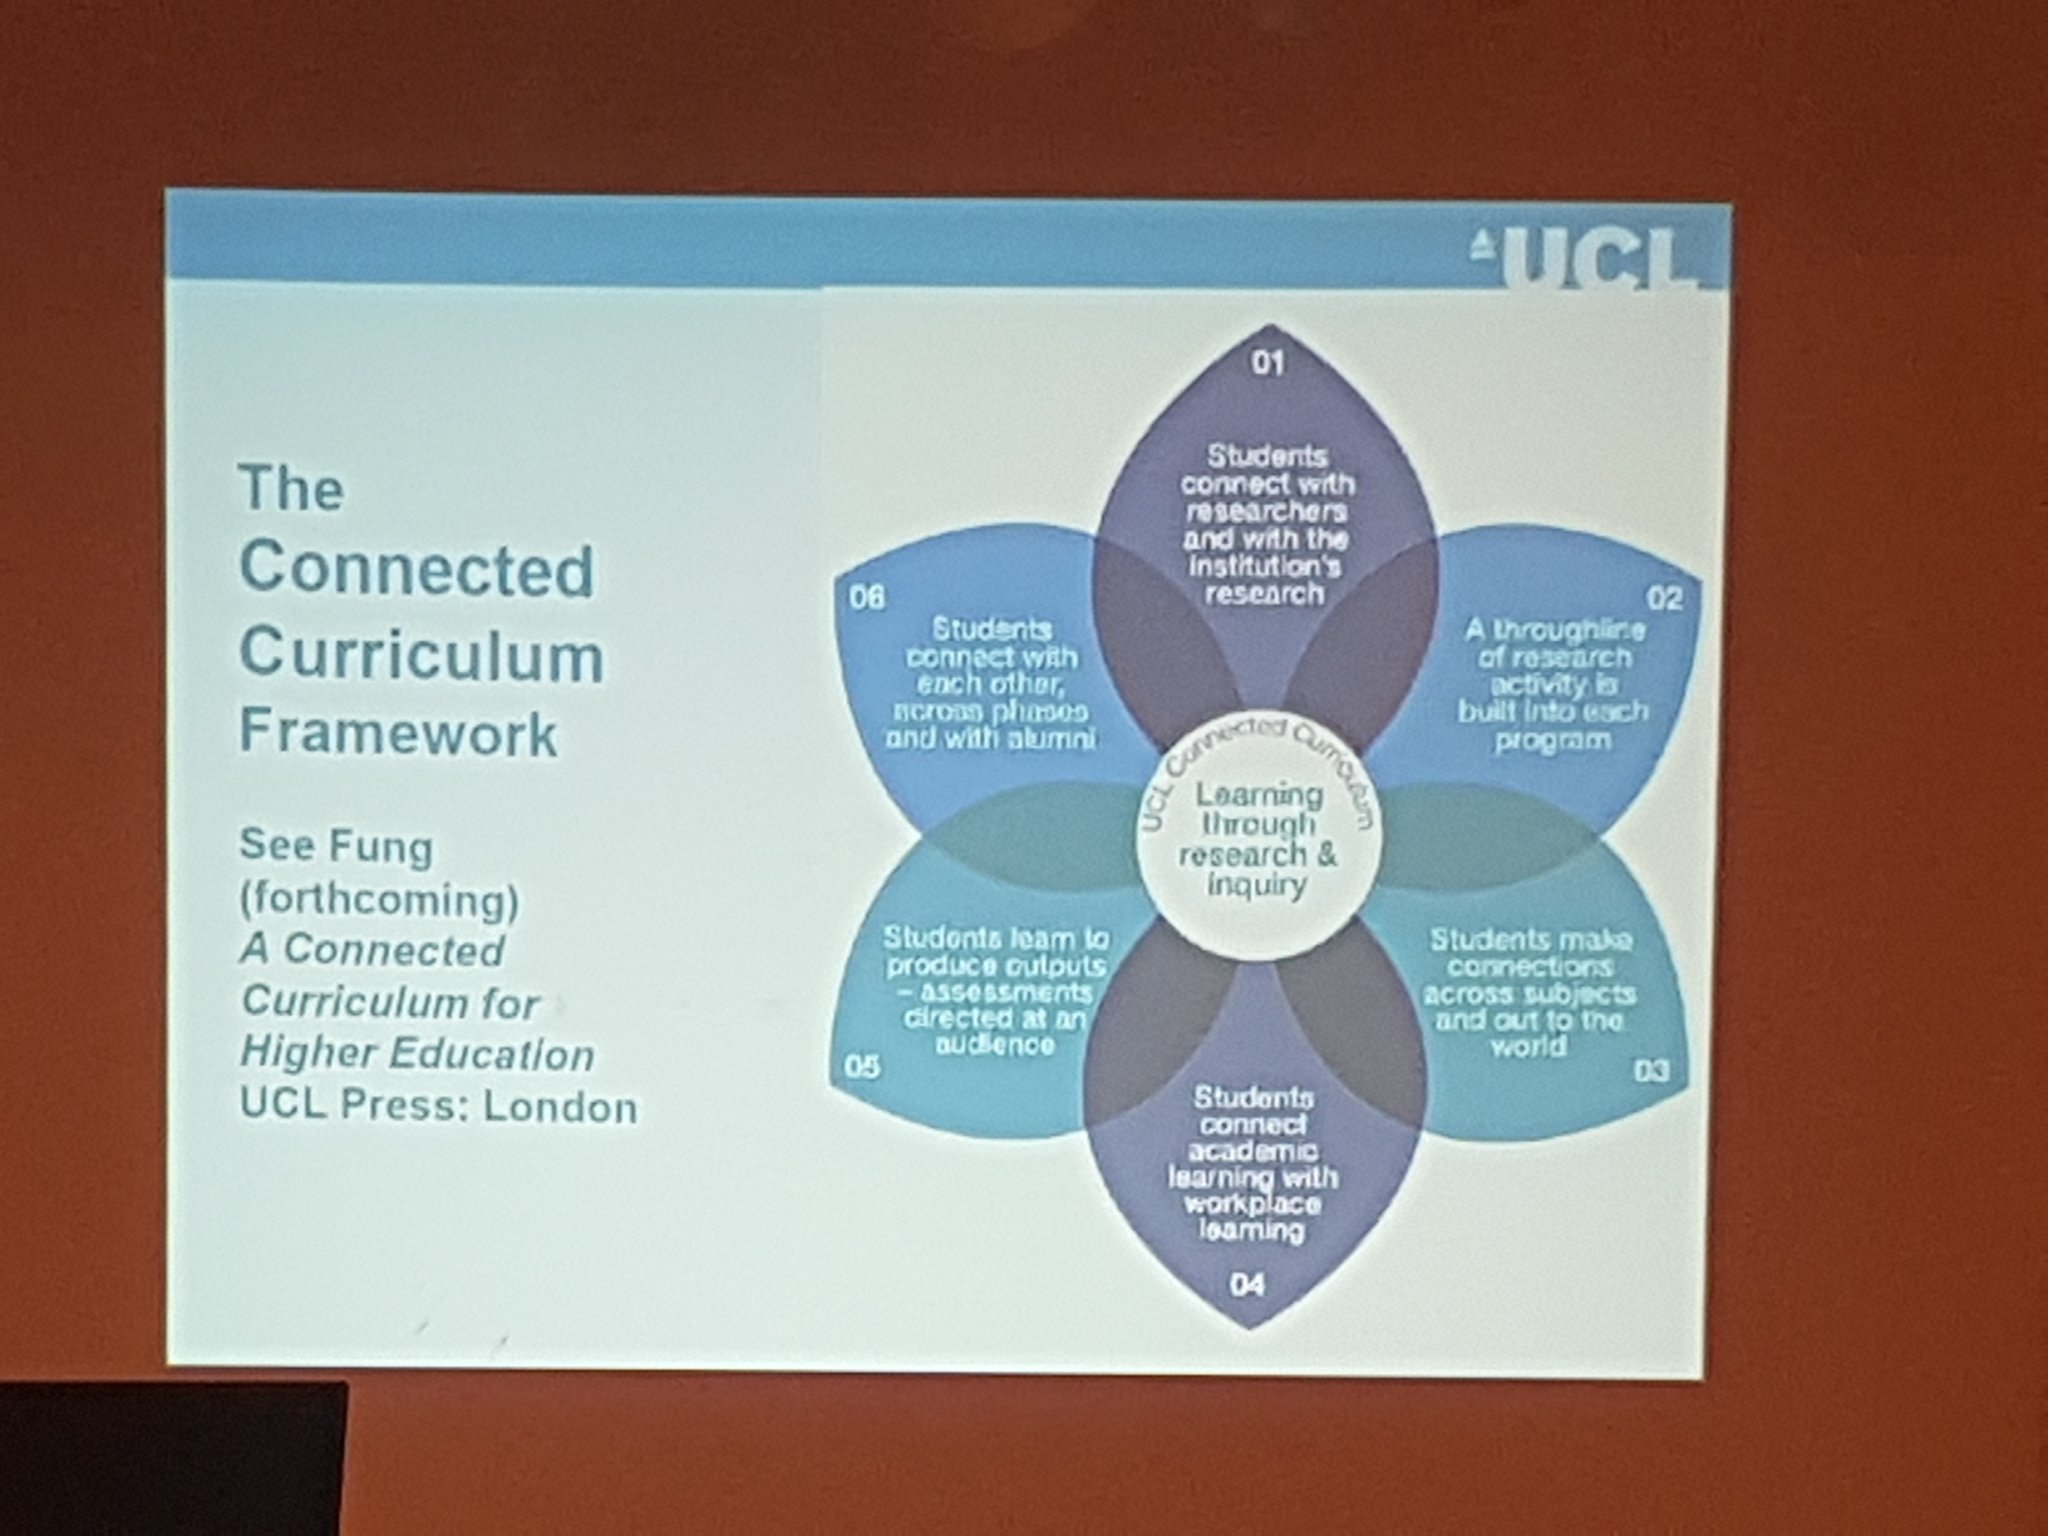 Now hearing from @DevonDilly about initiatives at UCL.  #CoCreateSwan https://t.co/WmneDtOfej